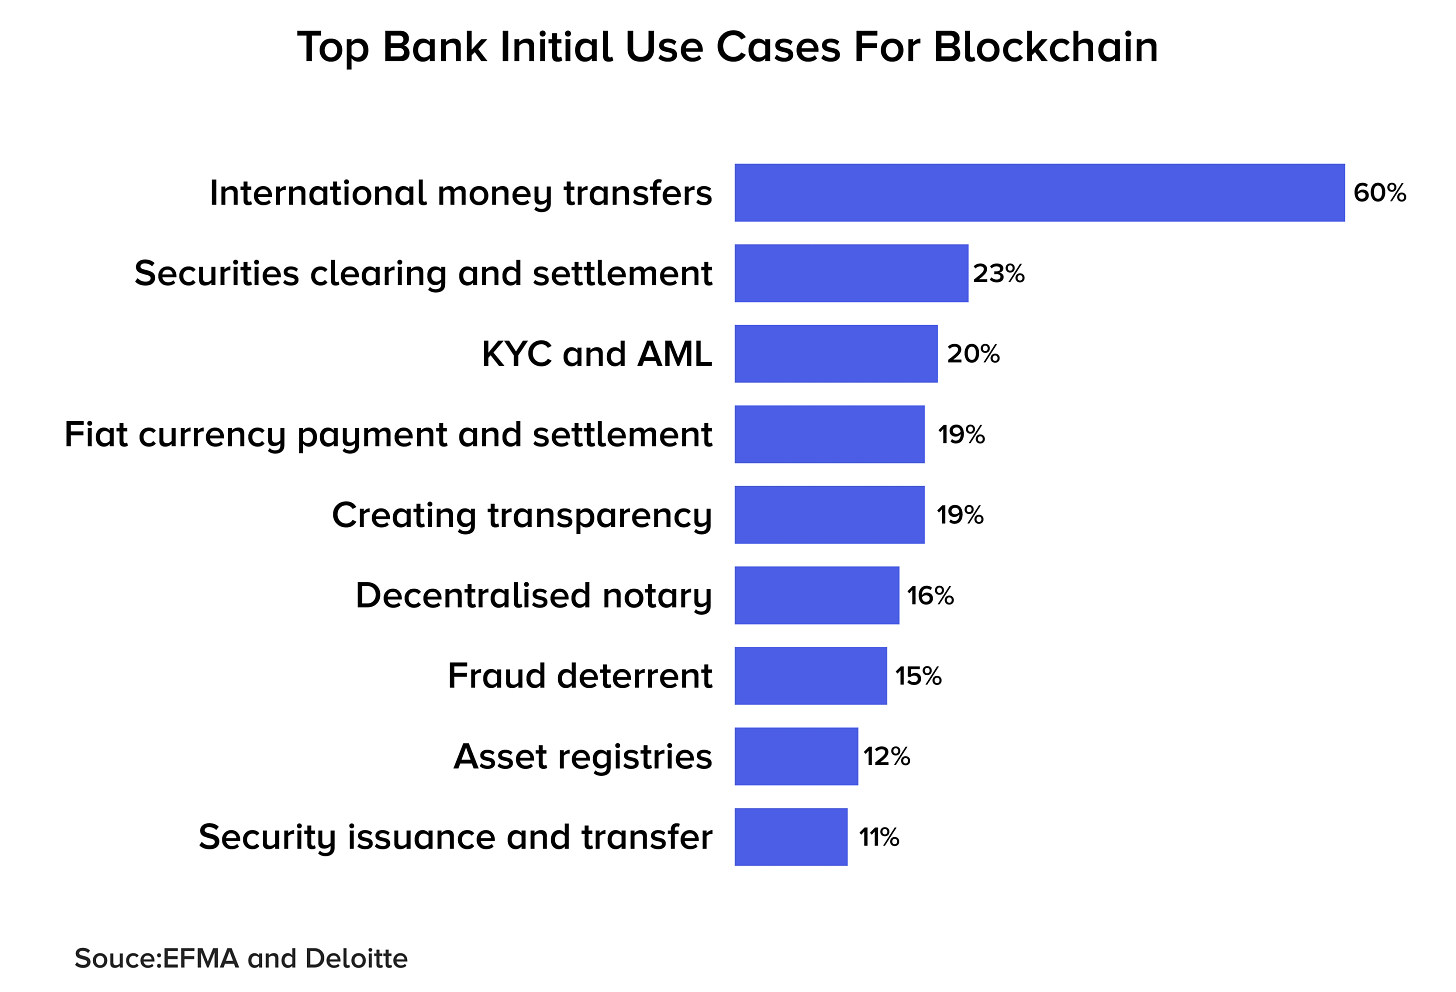 Why are Banks Adopting Blockchain Technology?